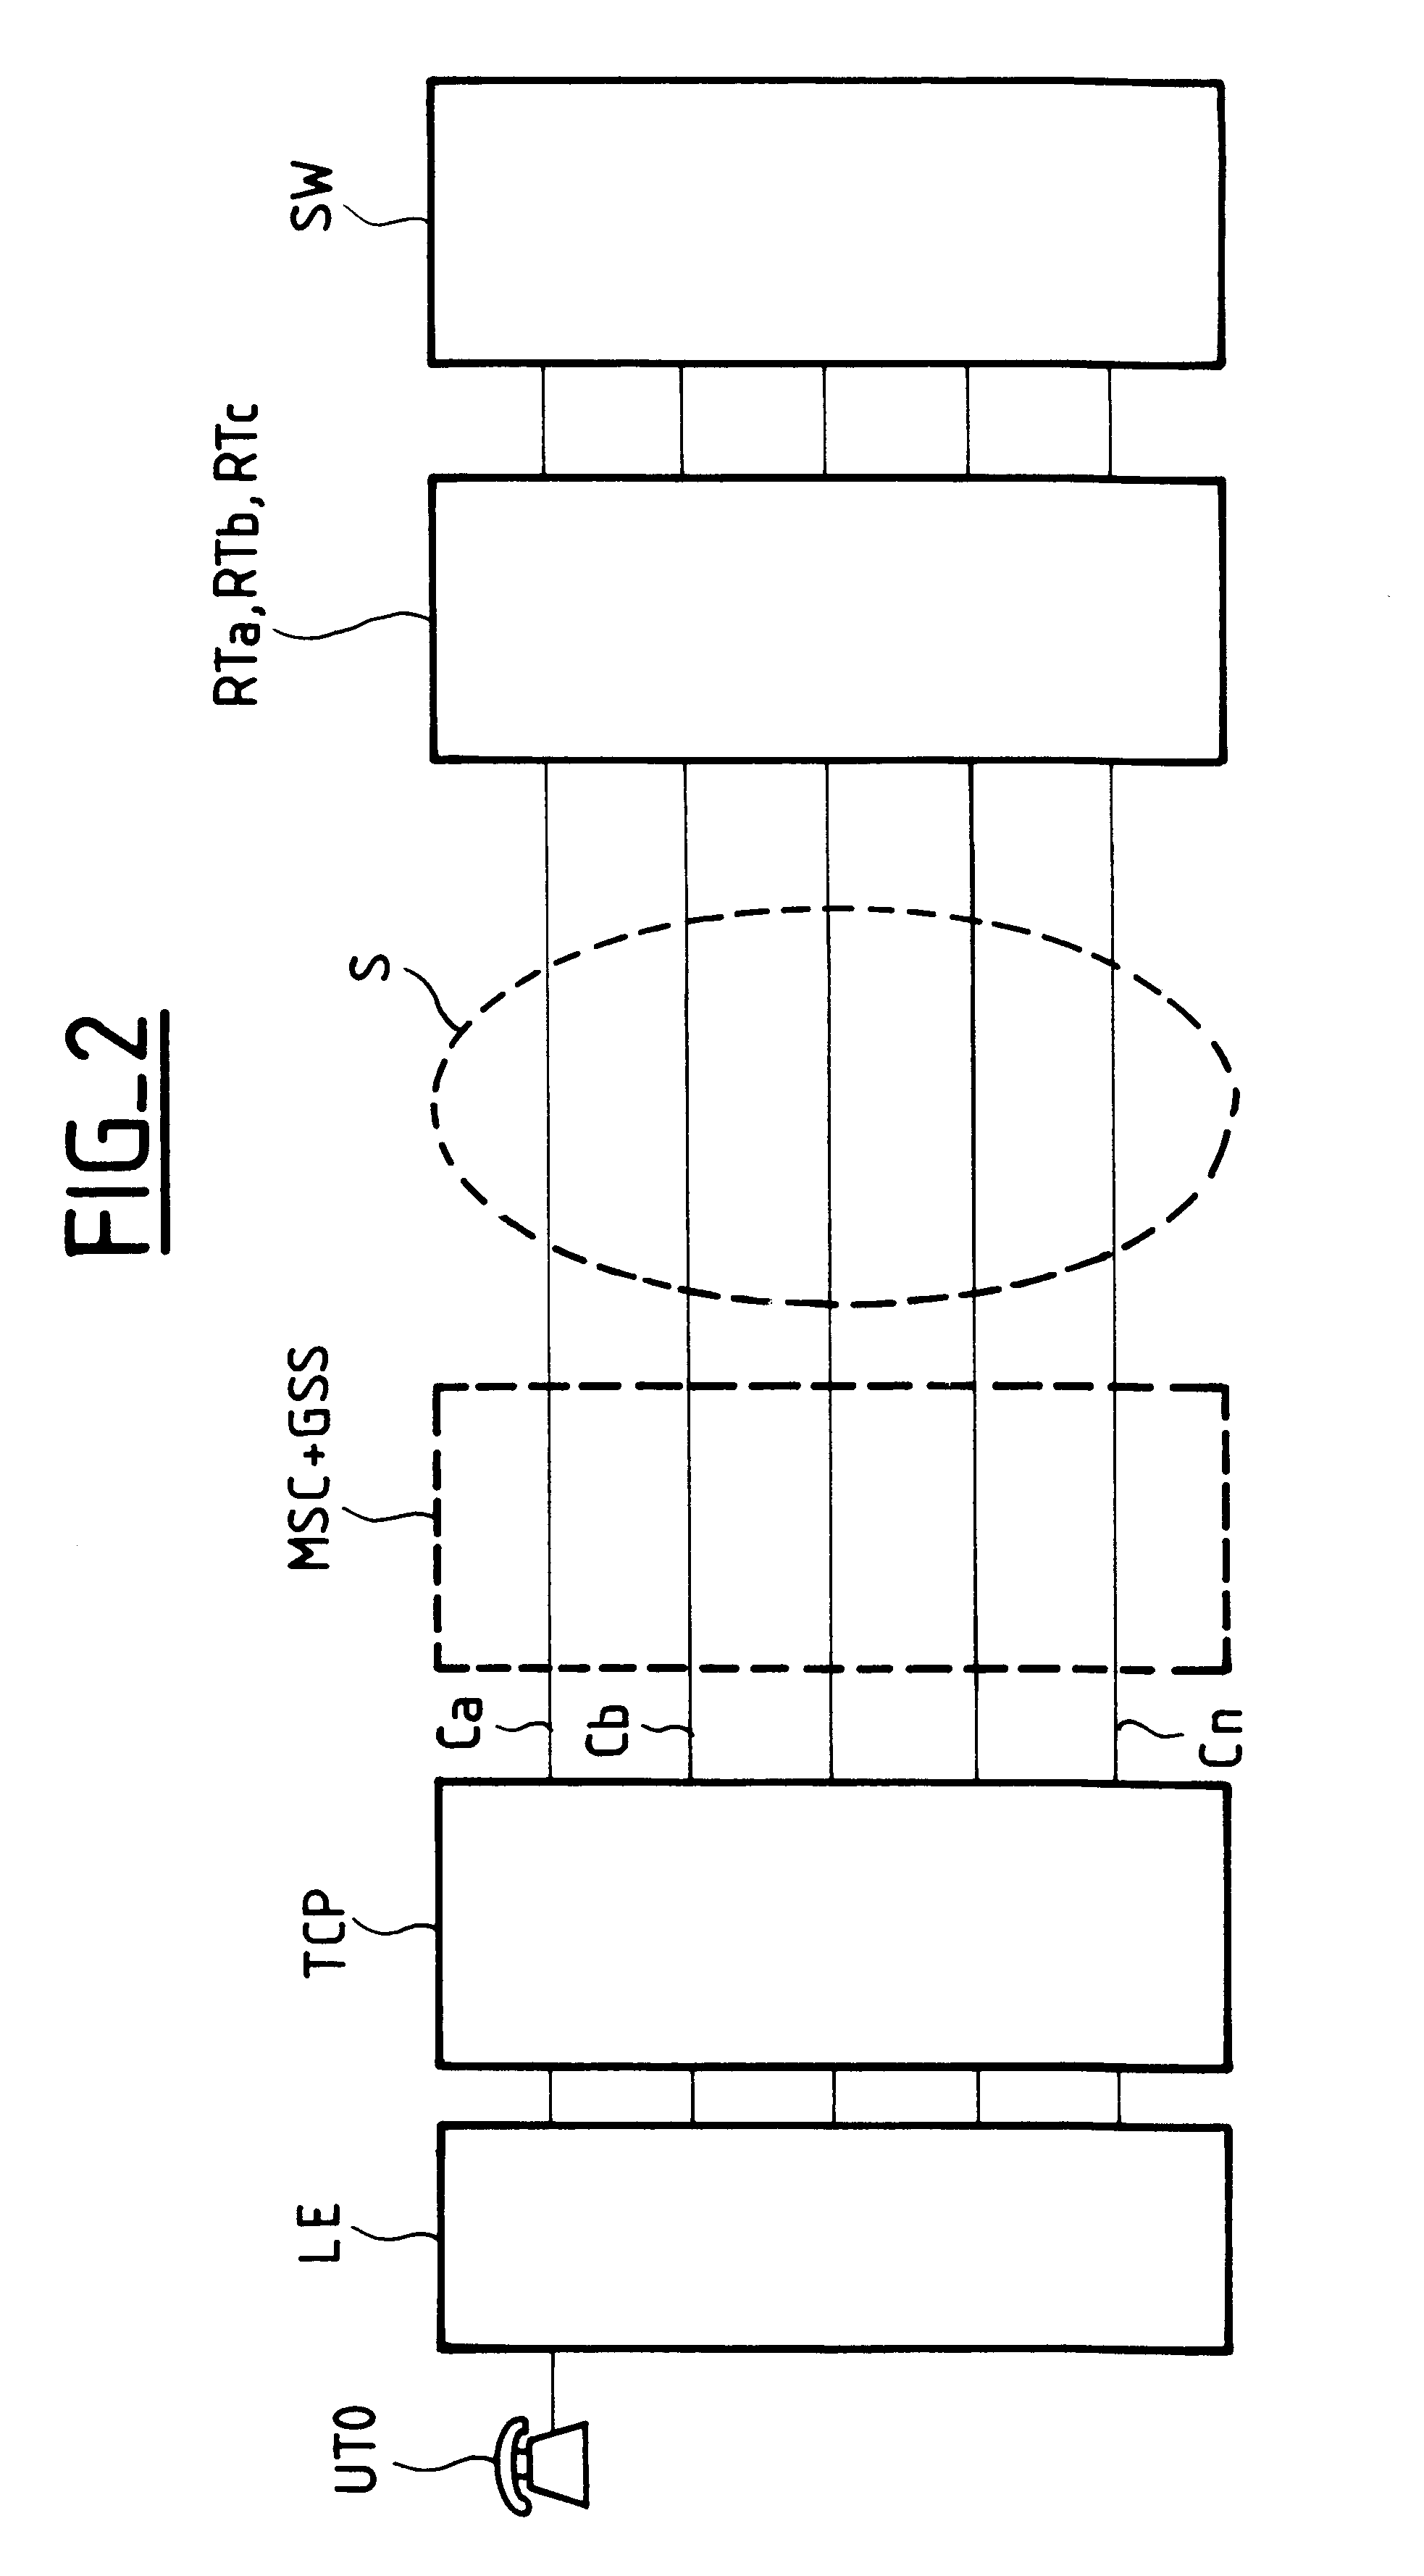 Transfer control point, mobile telephone fixed terminal and switch capable of being used in a device for connecting a telephone switch located in an isolated community to a fixed telephone network